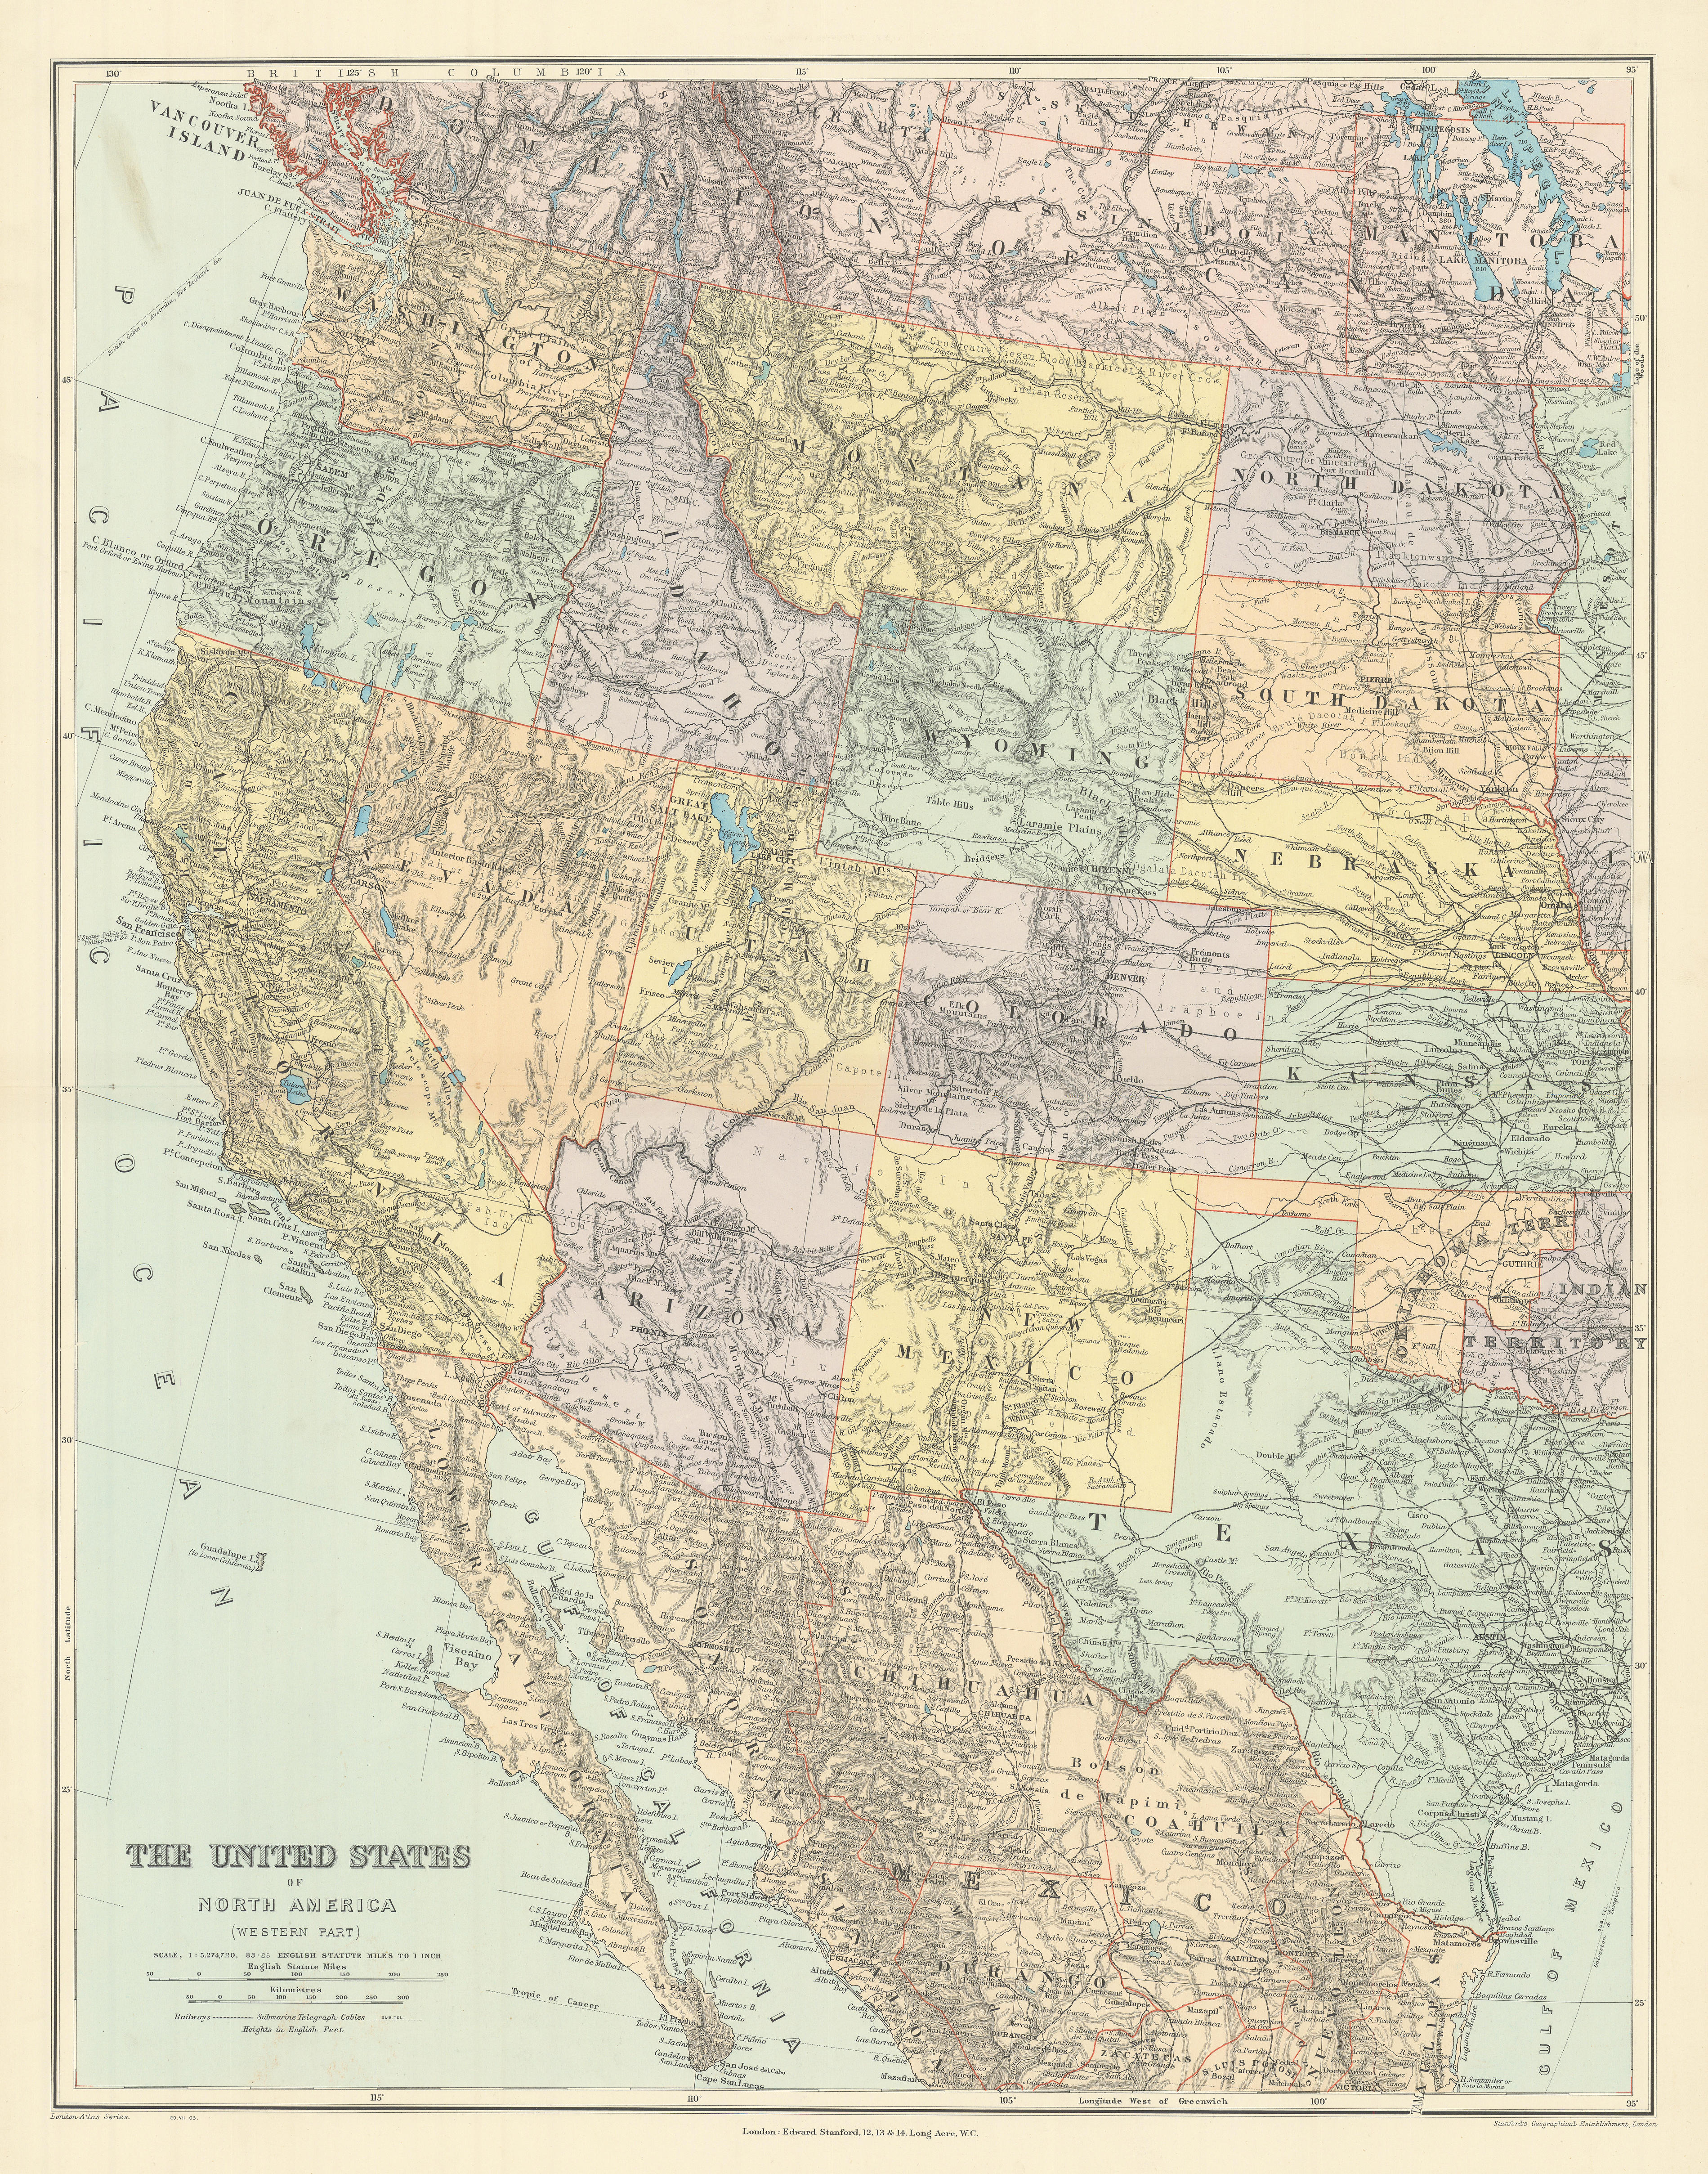 The United States of North America, Western part. USA. 69x54cm STANFORD 1904 map